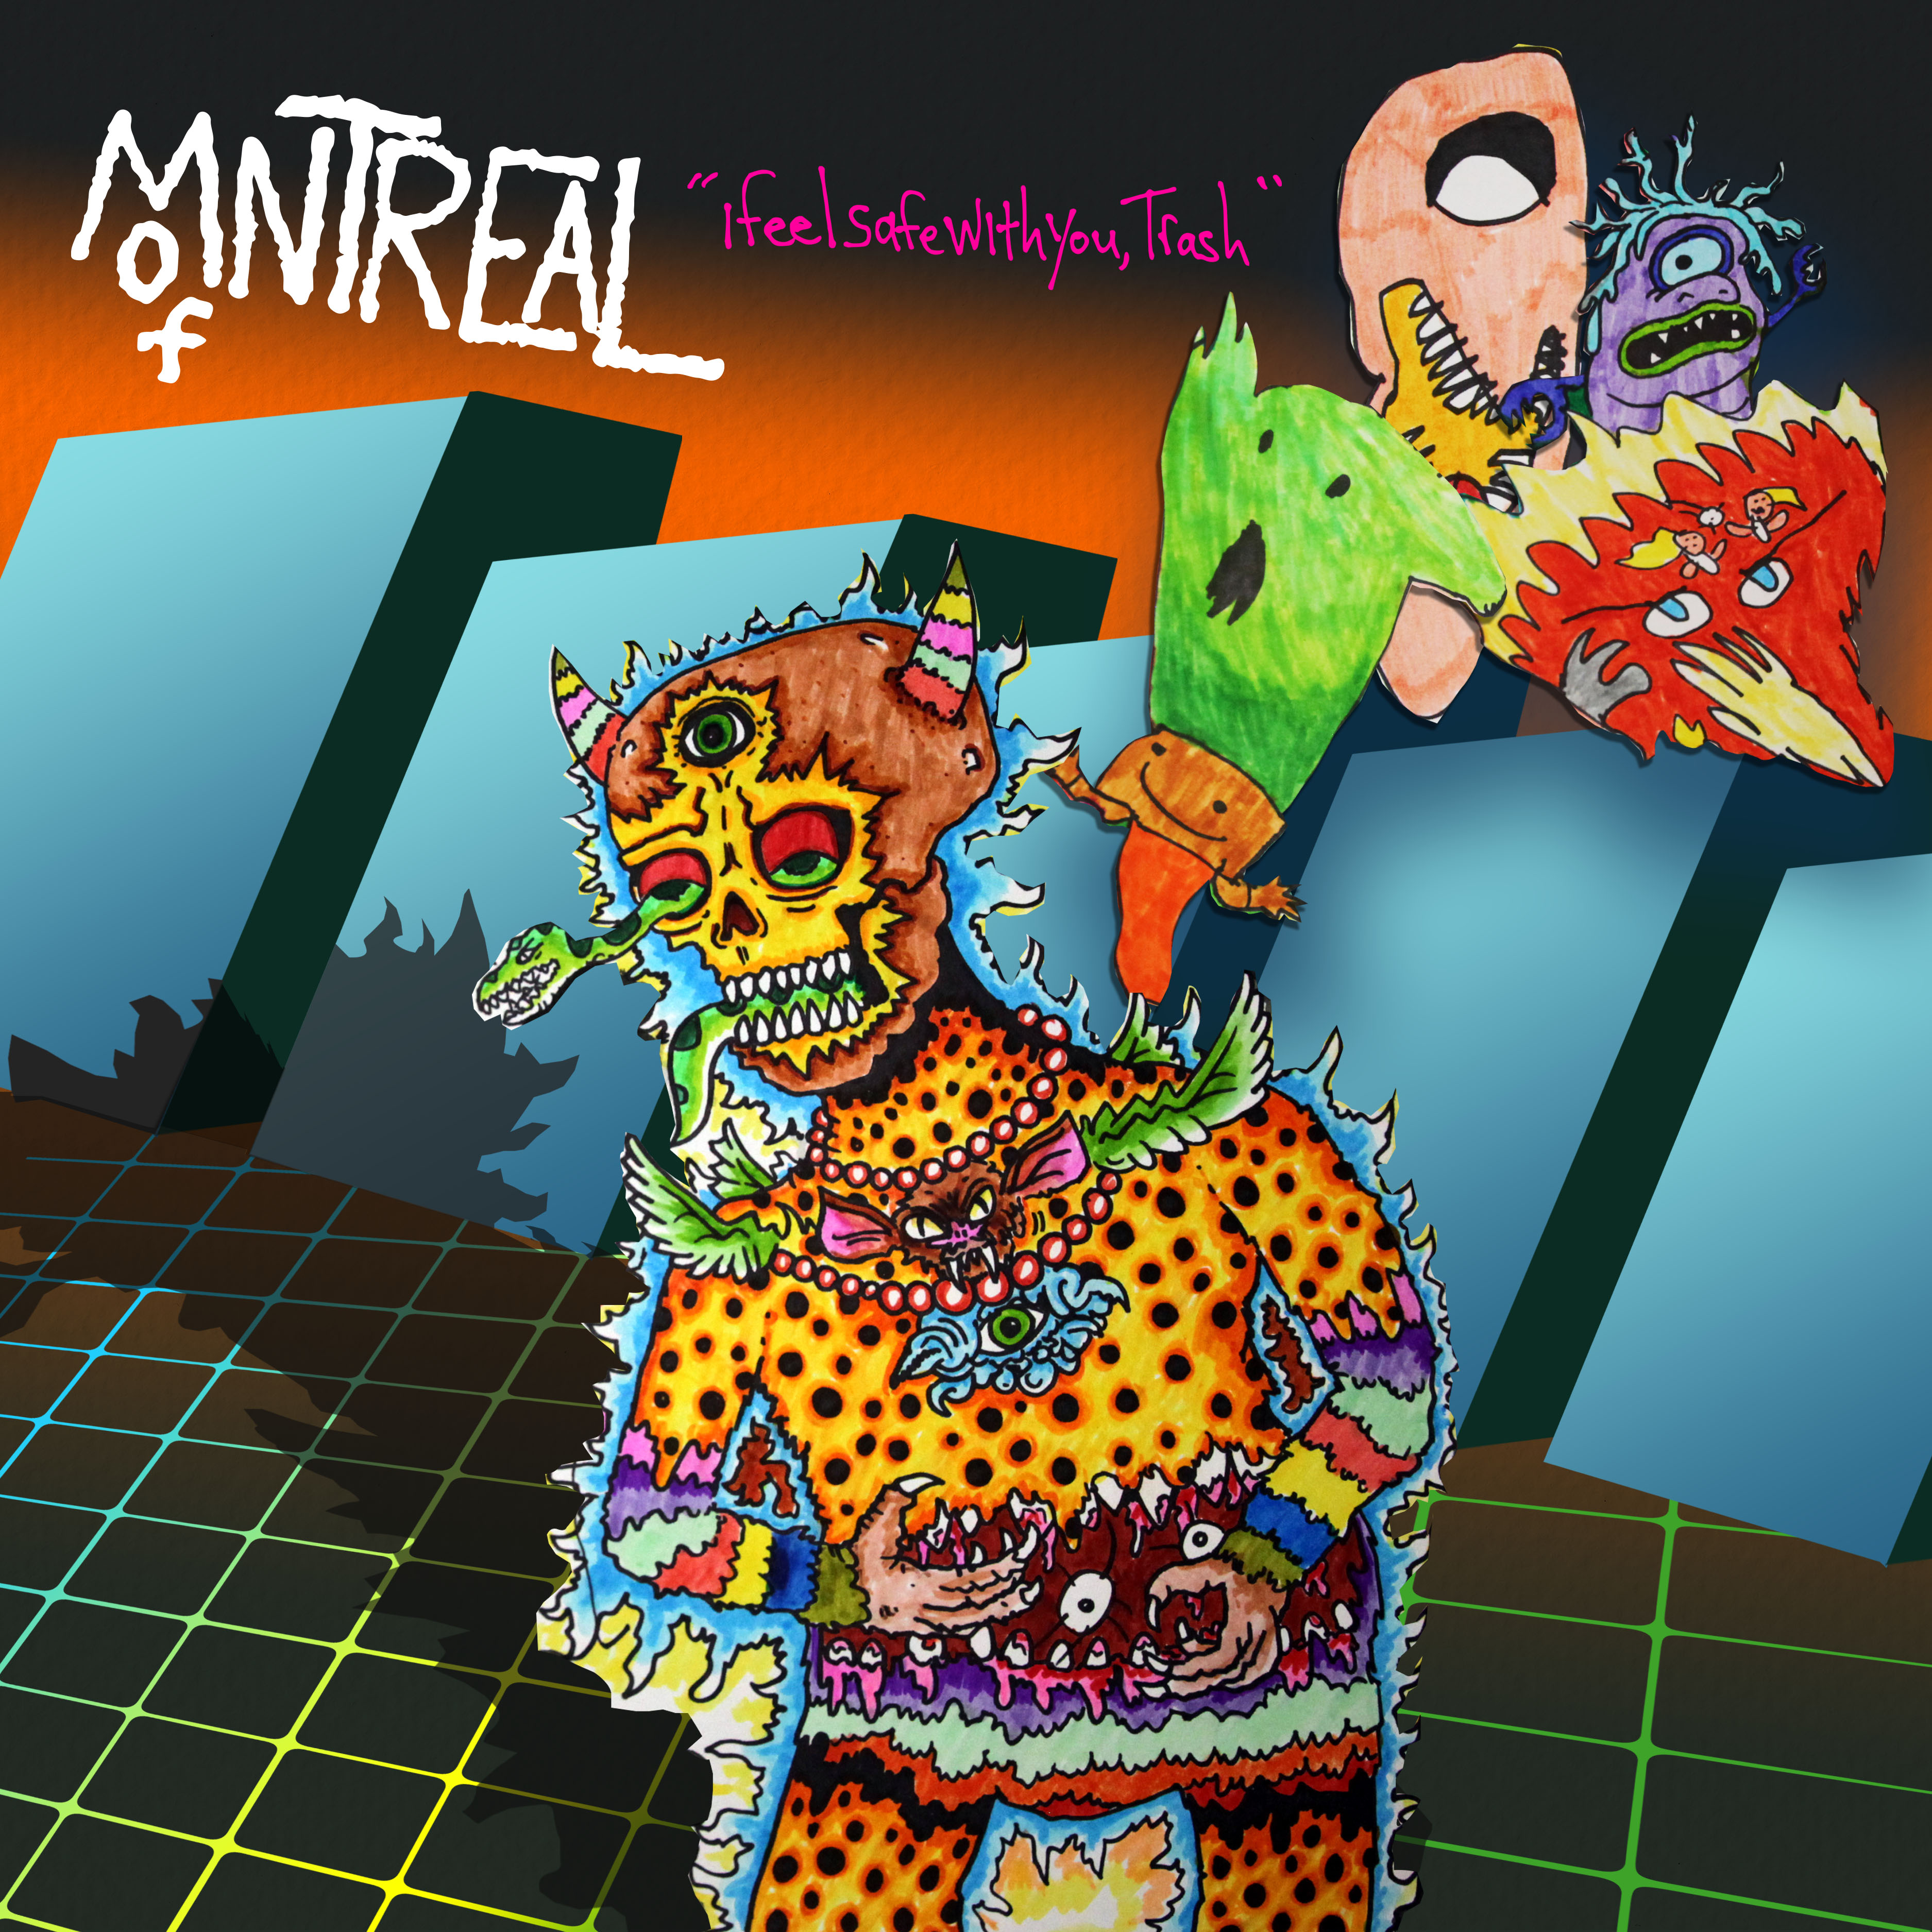 of Montreal - I Feel Safe With You, Trash (2021) [FLAC 24bit/96kHz]